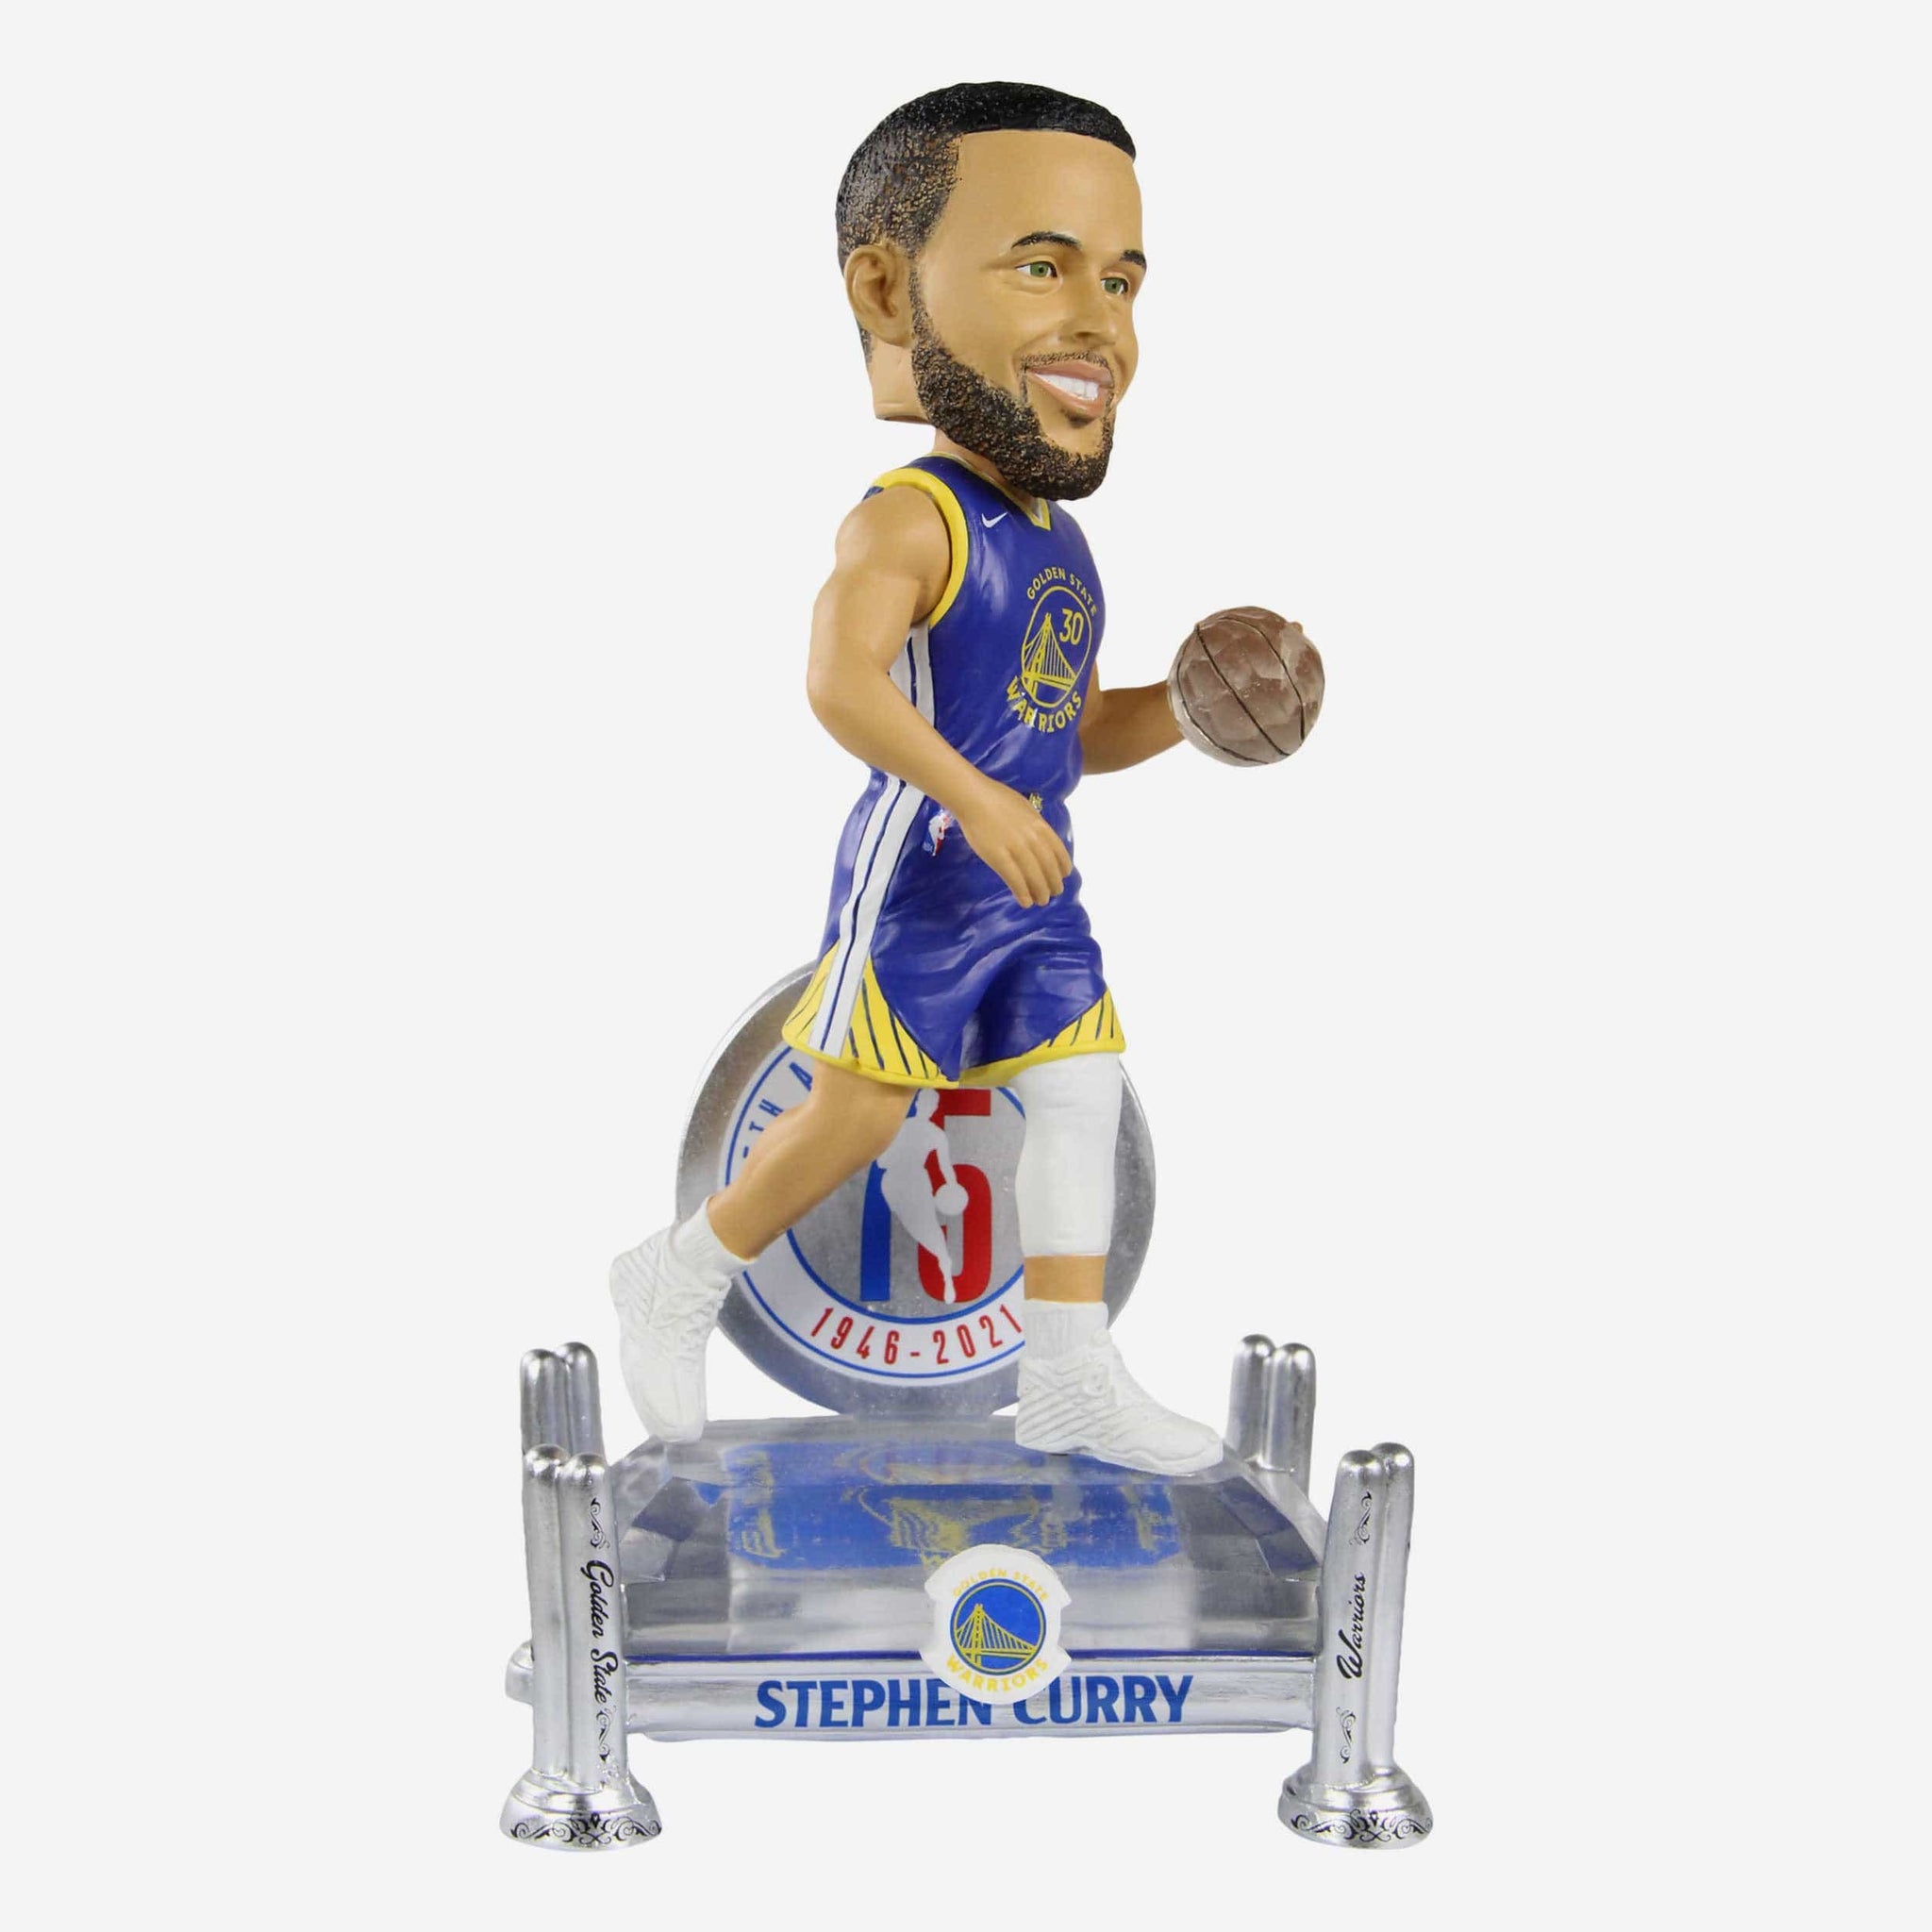 Golden State Warriors unveil three new bobblehead giveaways